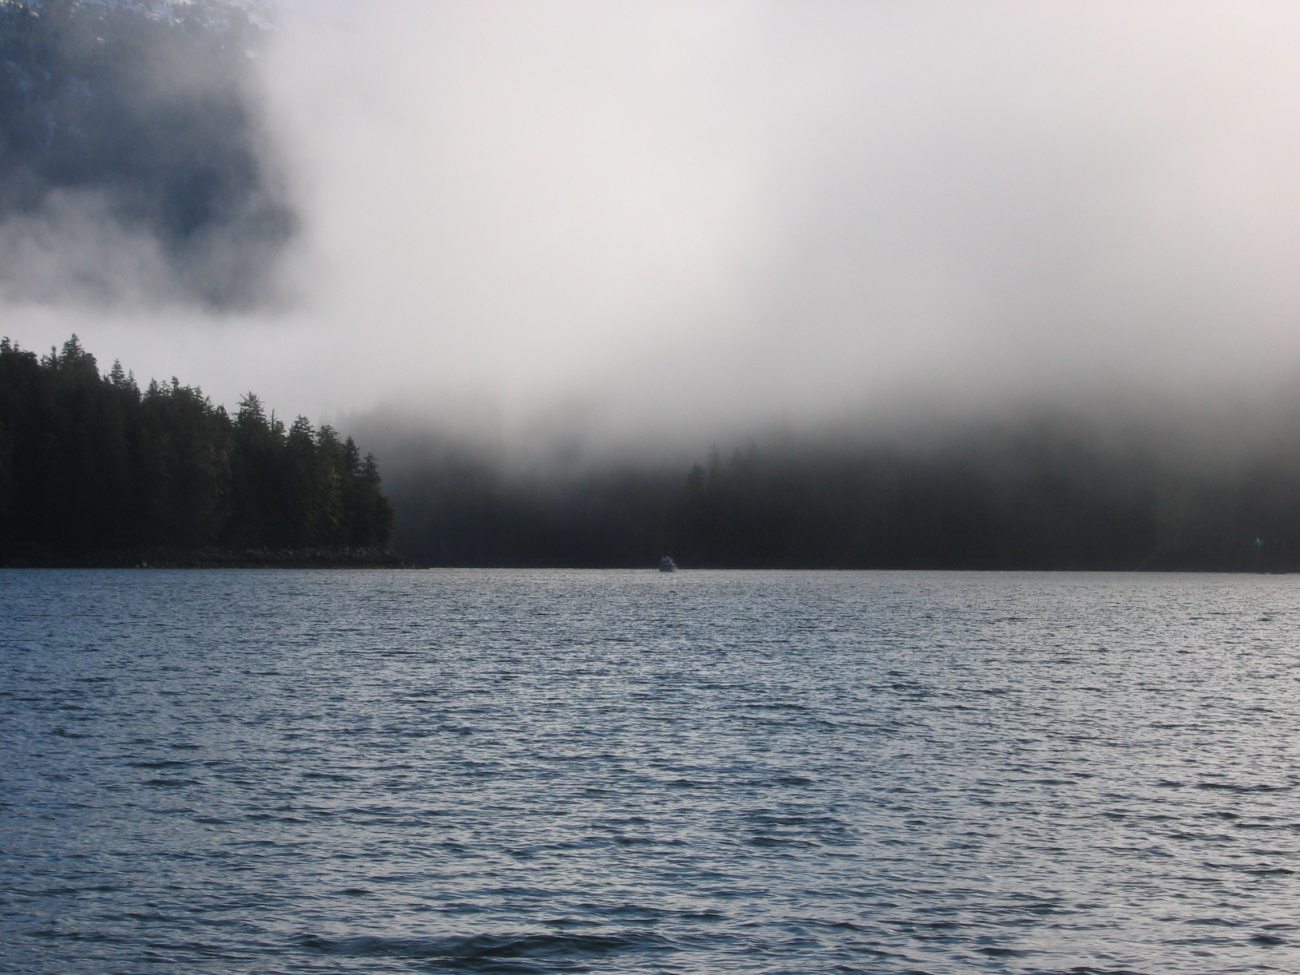 A sounding boat is seen in the distance below fog shrouded hills